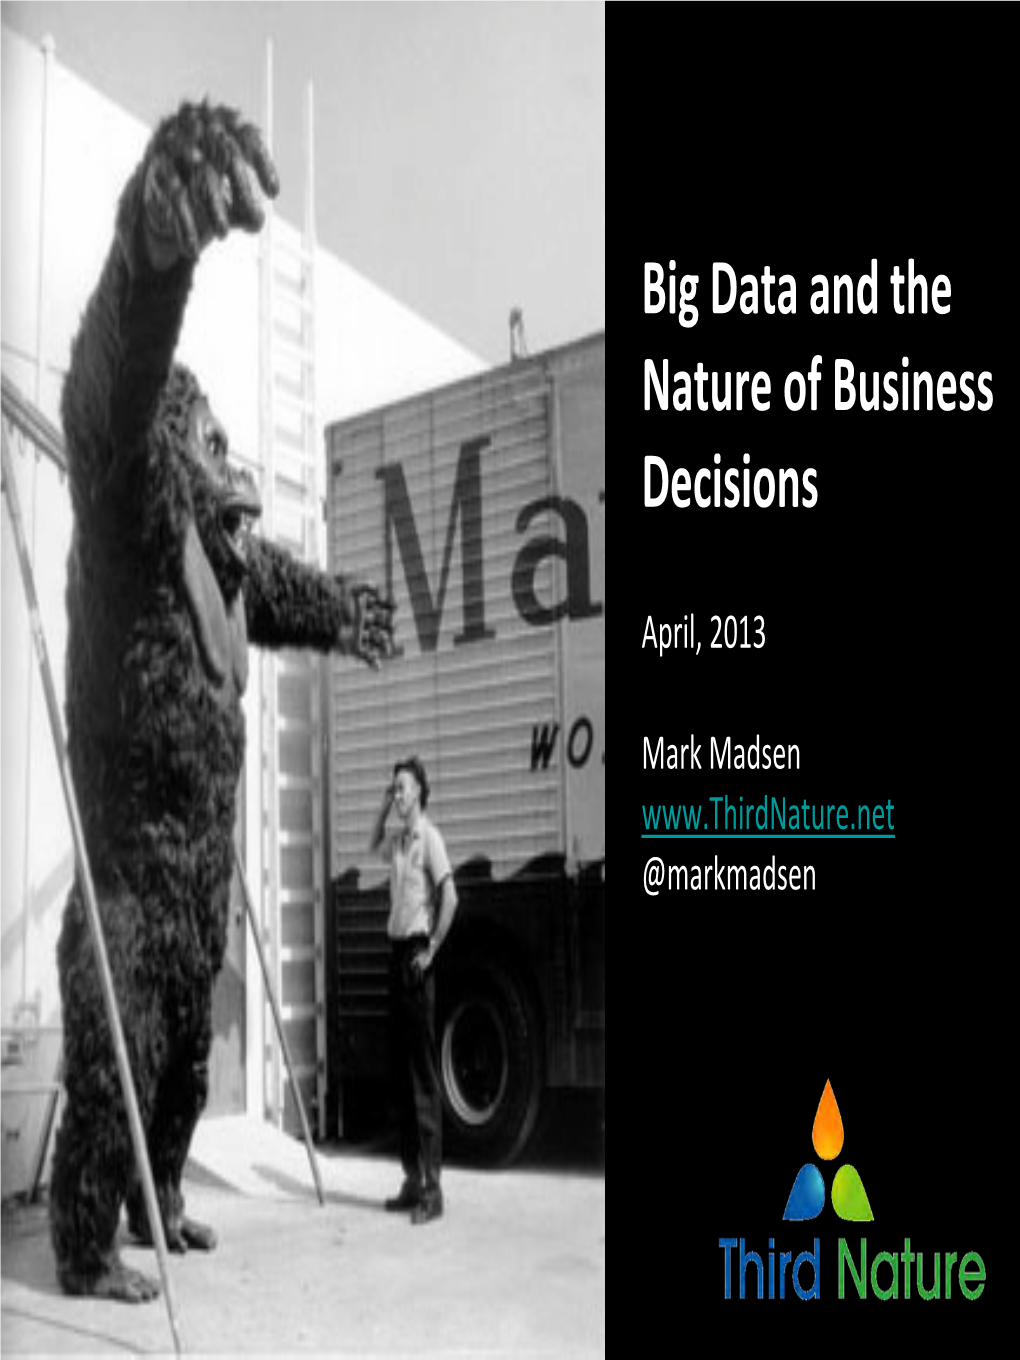 Big Data and the Nature of Business Decisions